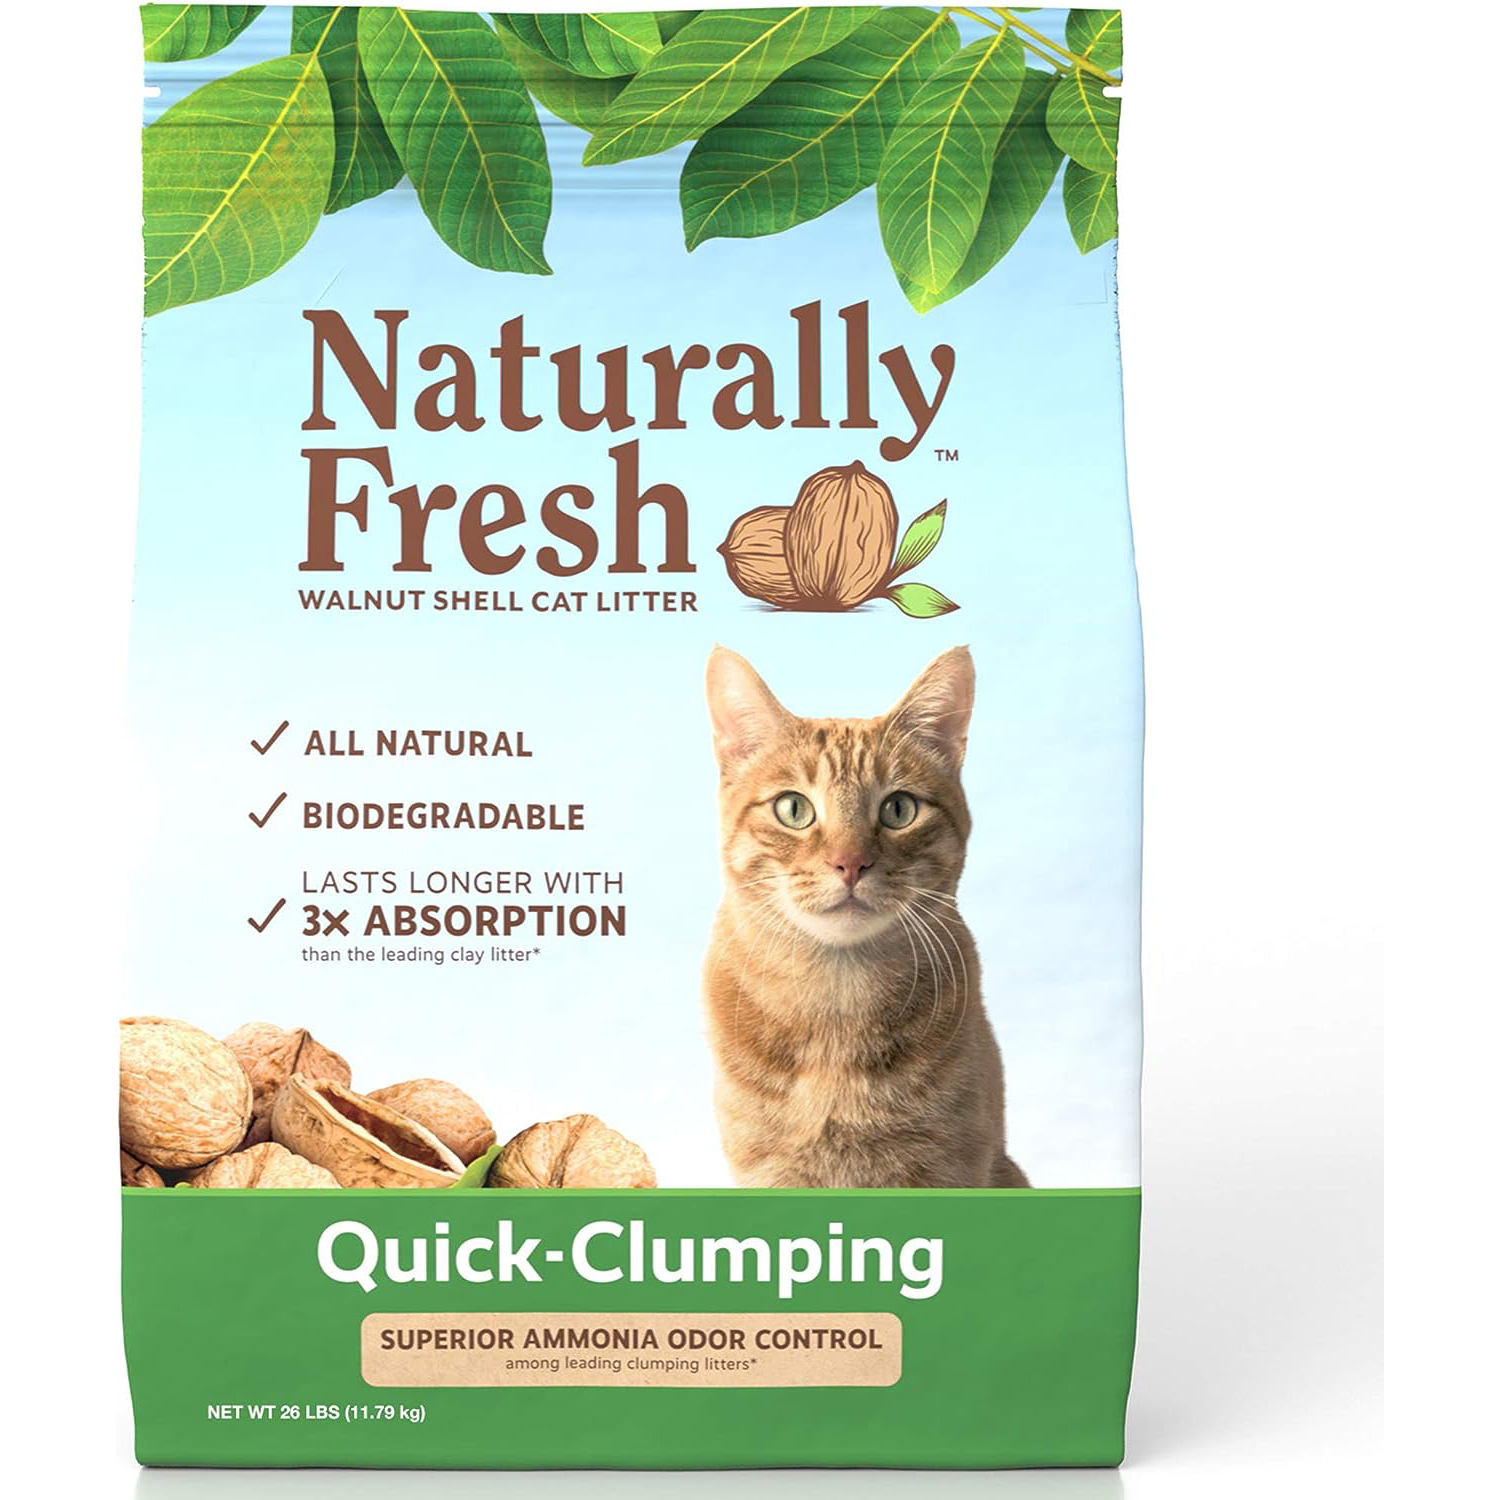 Naturally Fresh Cat Litter - Walnut-Based Quick-Clumping Kitty Litter, Unscented , 26 lb (23001) new